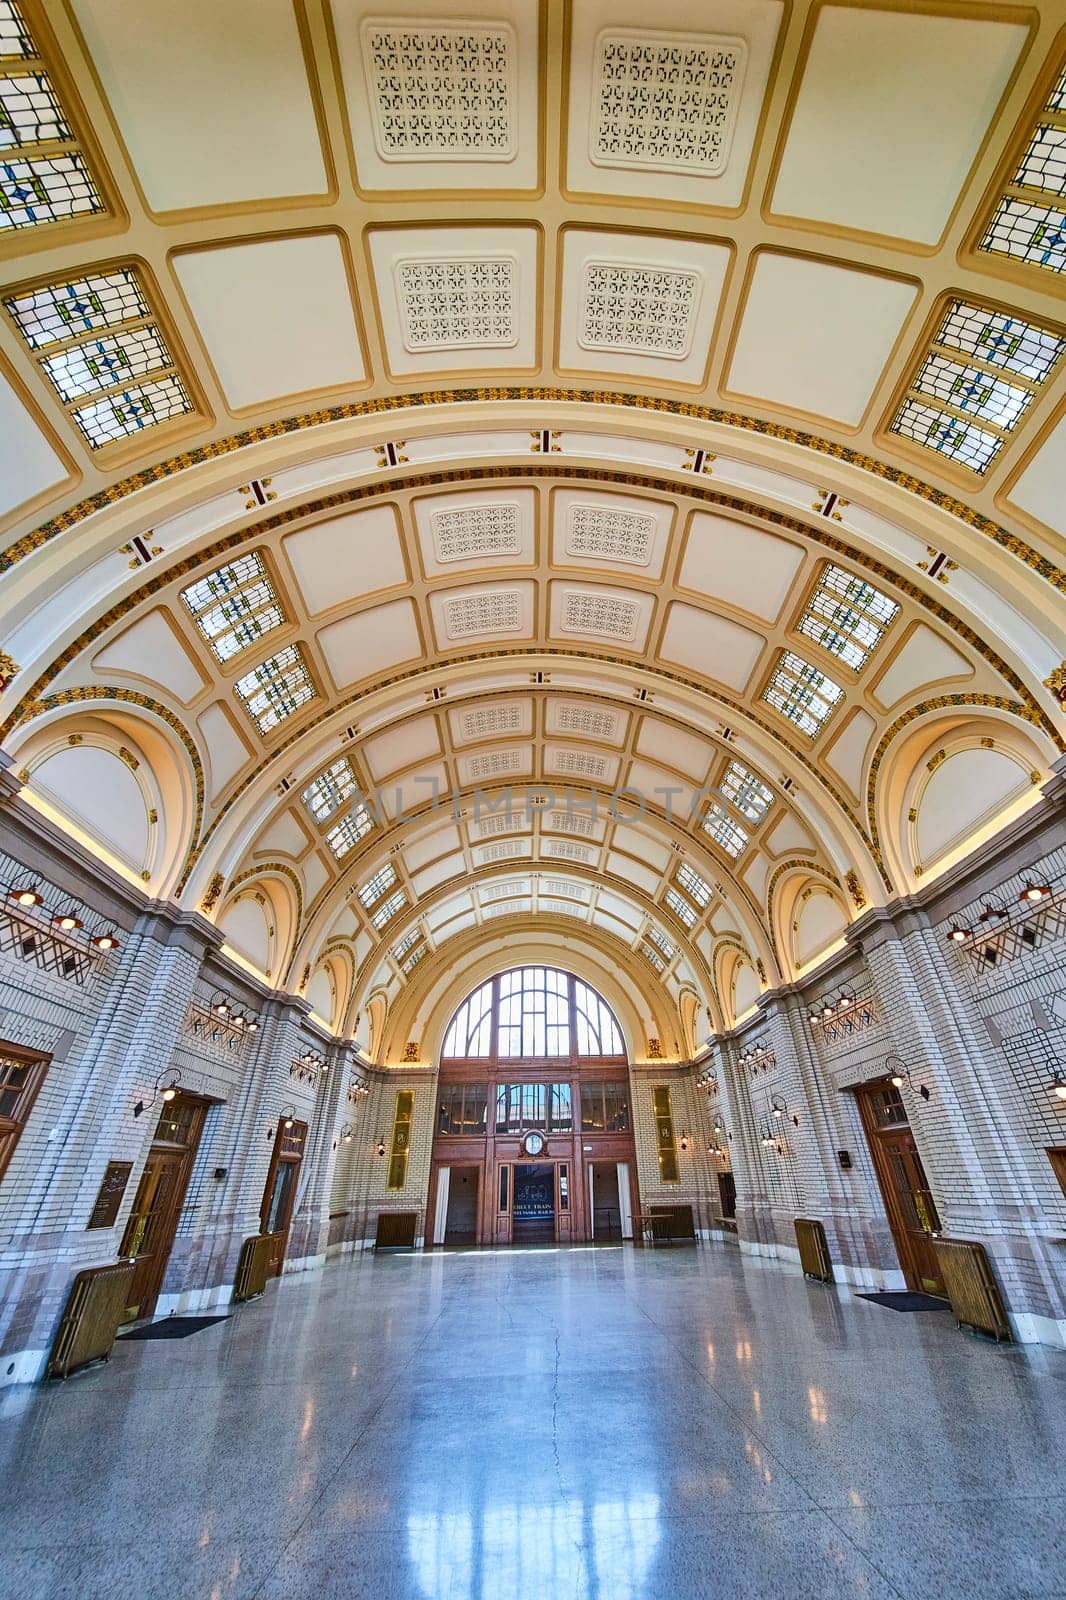 Breathtaking view inside Baker Street Station, Fort Wayne, showcasing intricate patterns and stained glass.